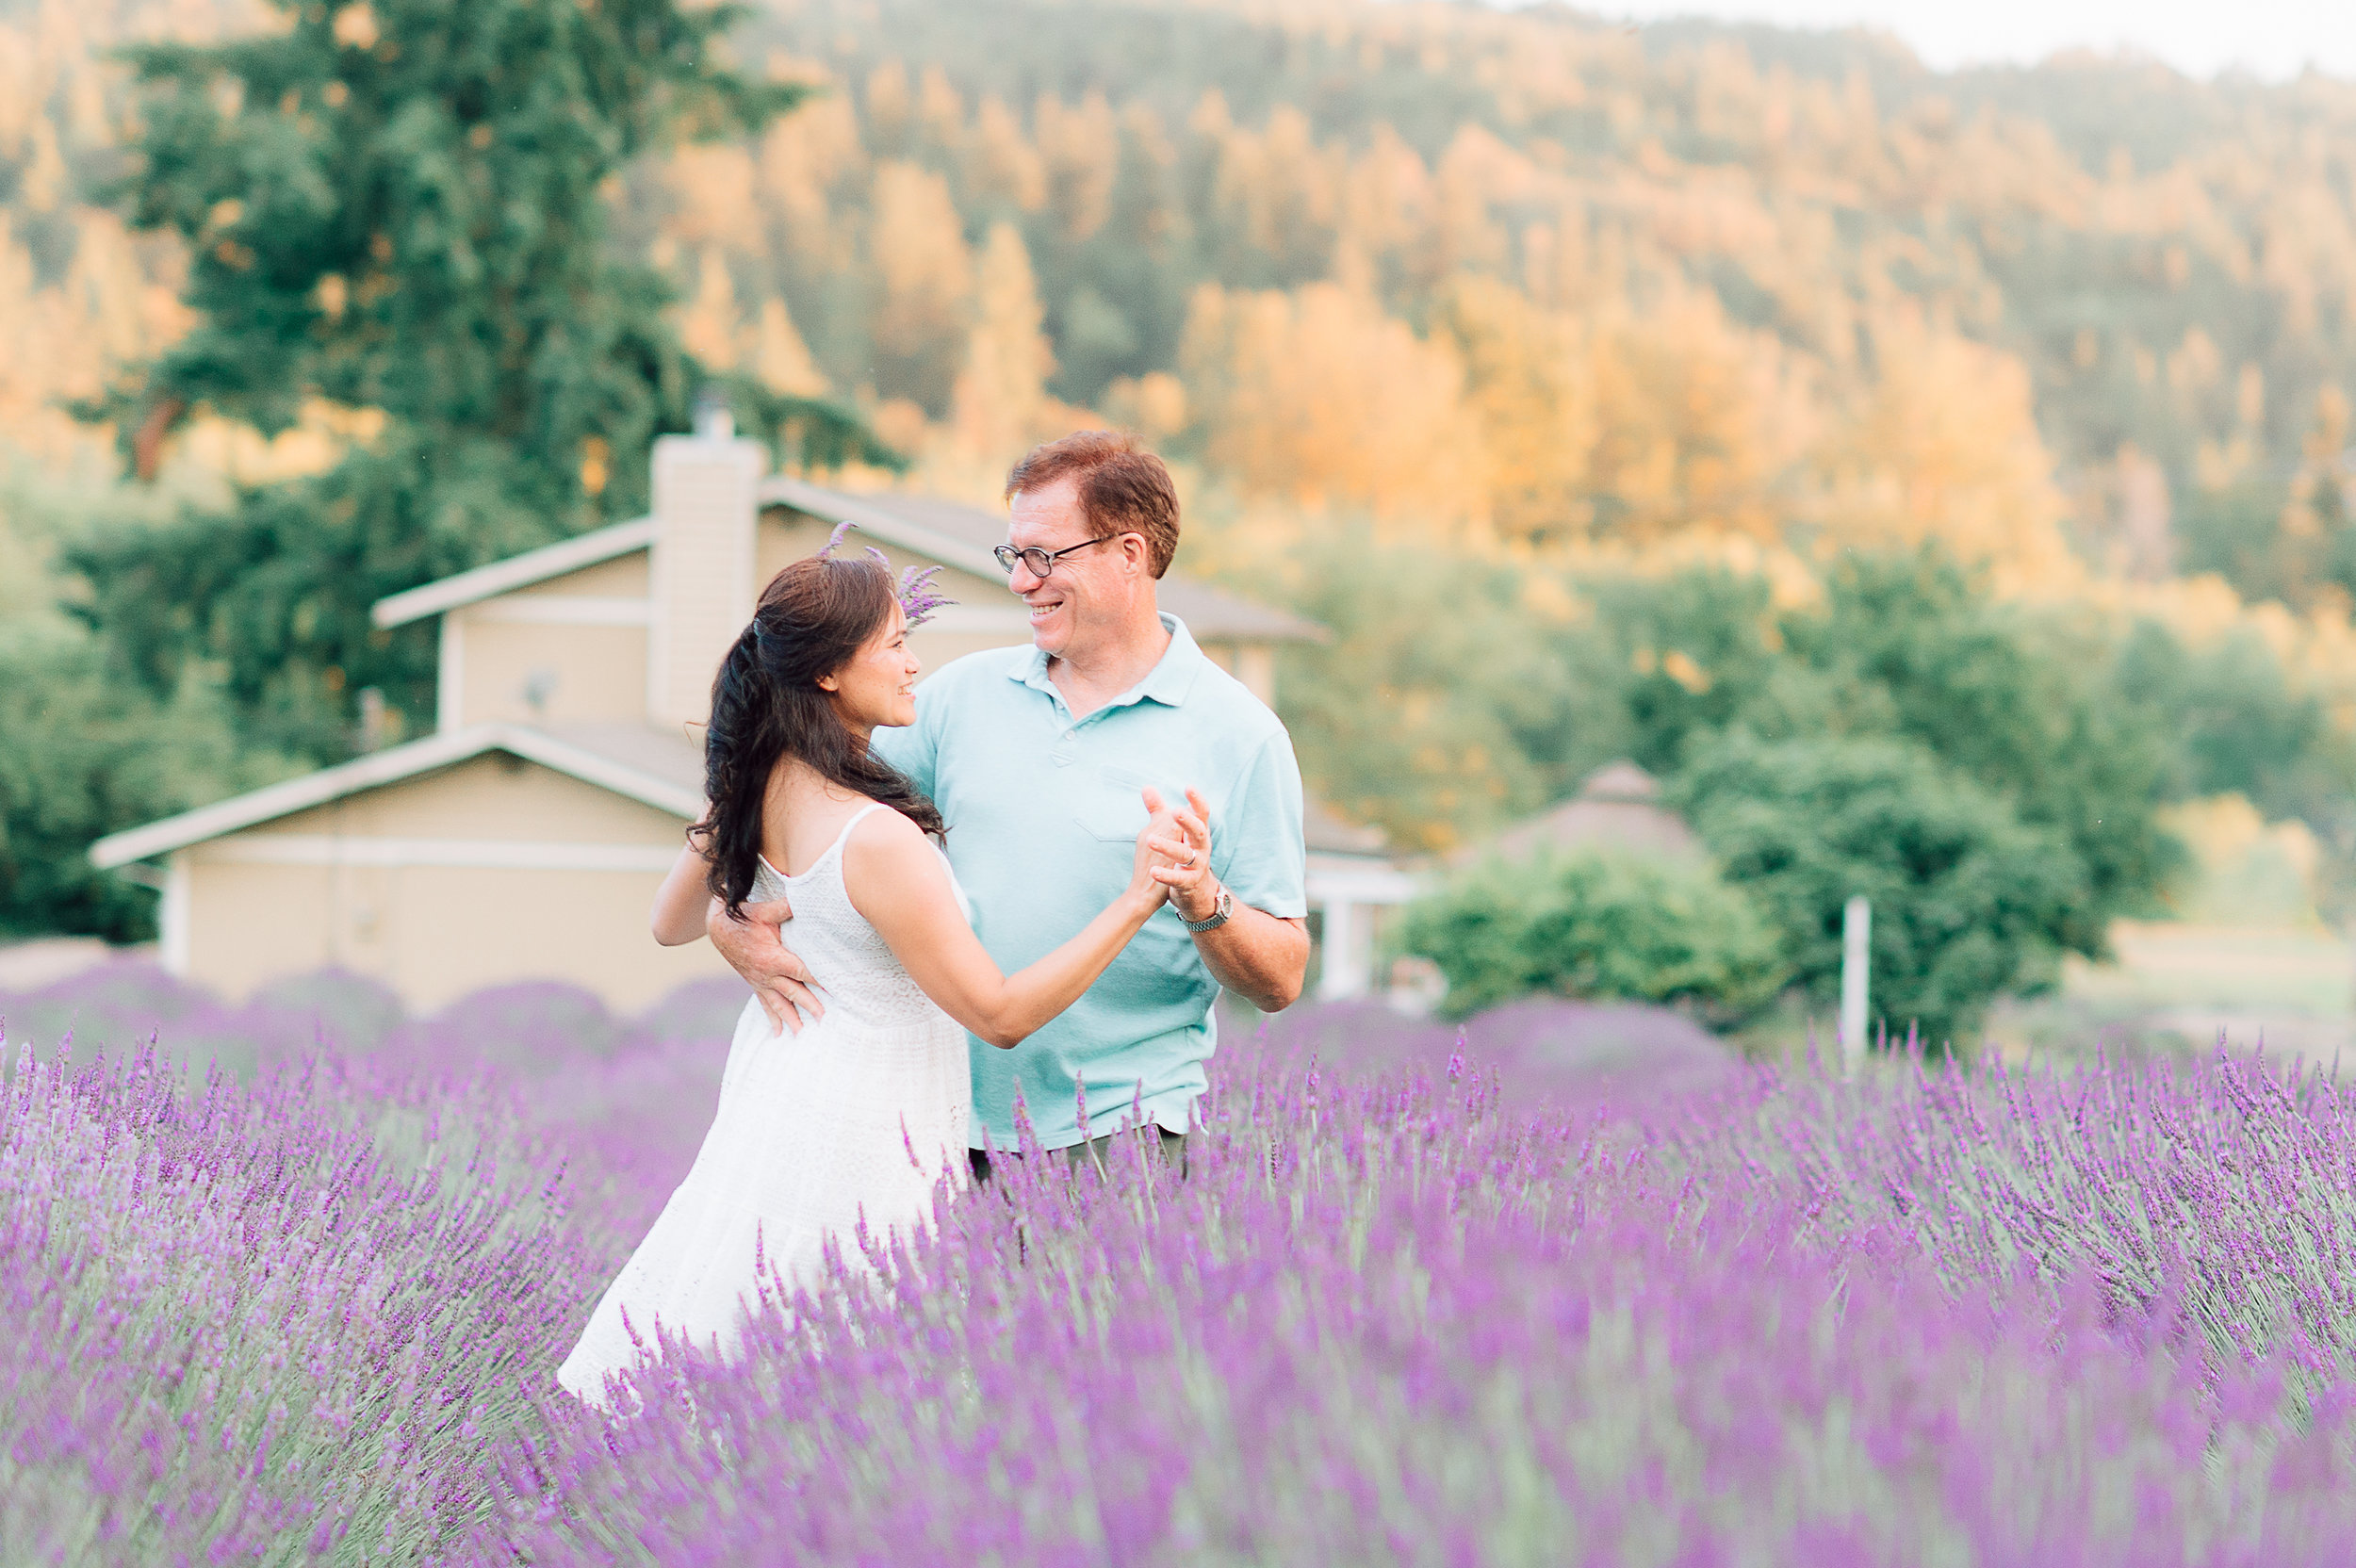 engagement_lavenderfield_youseephotography_LidiaOtto (60).jpg